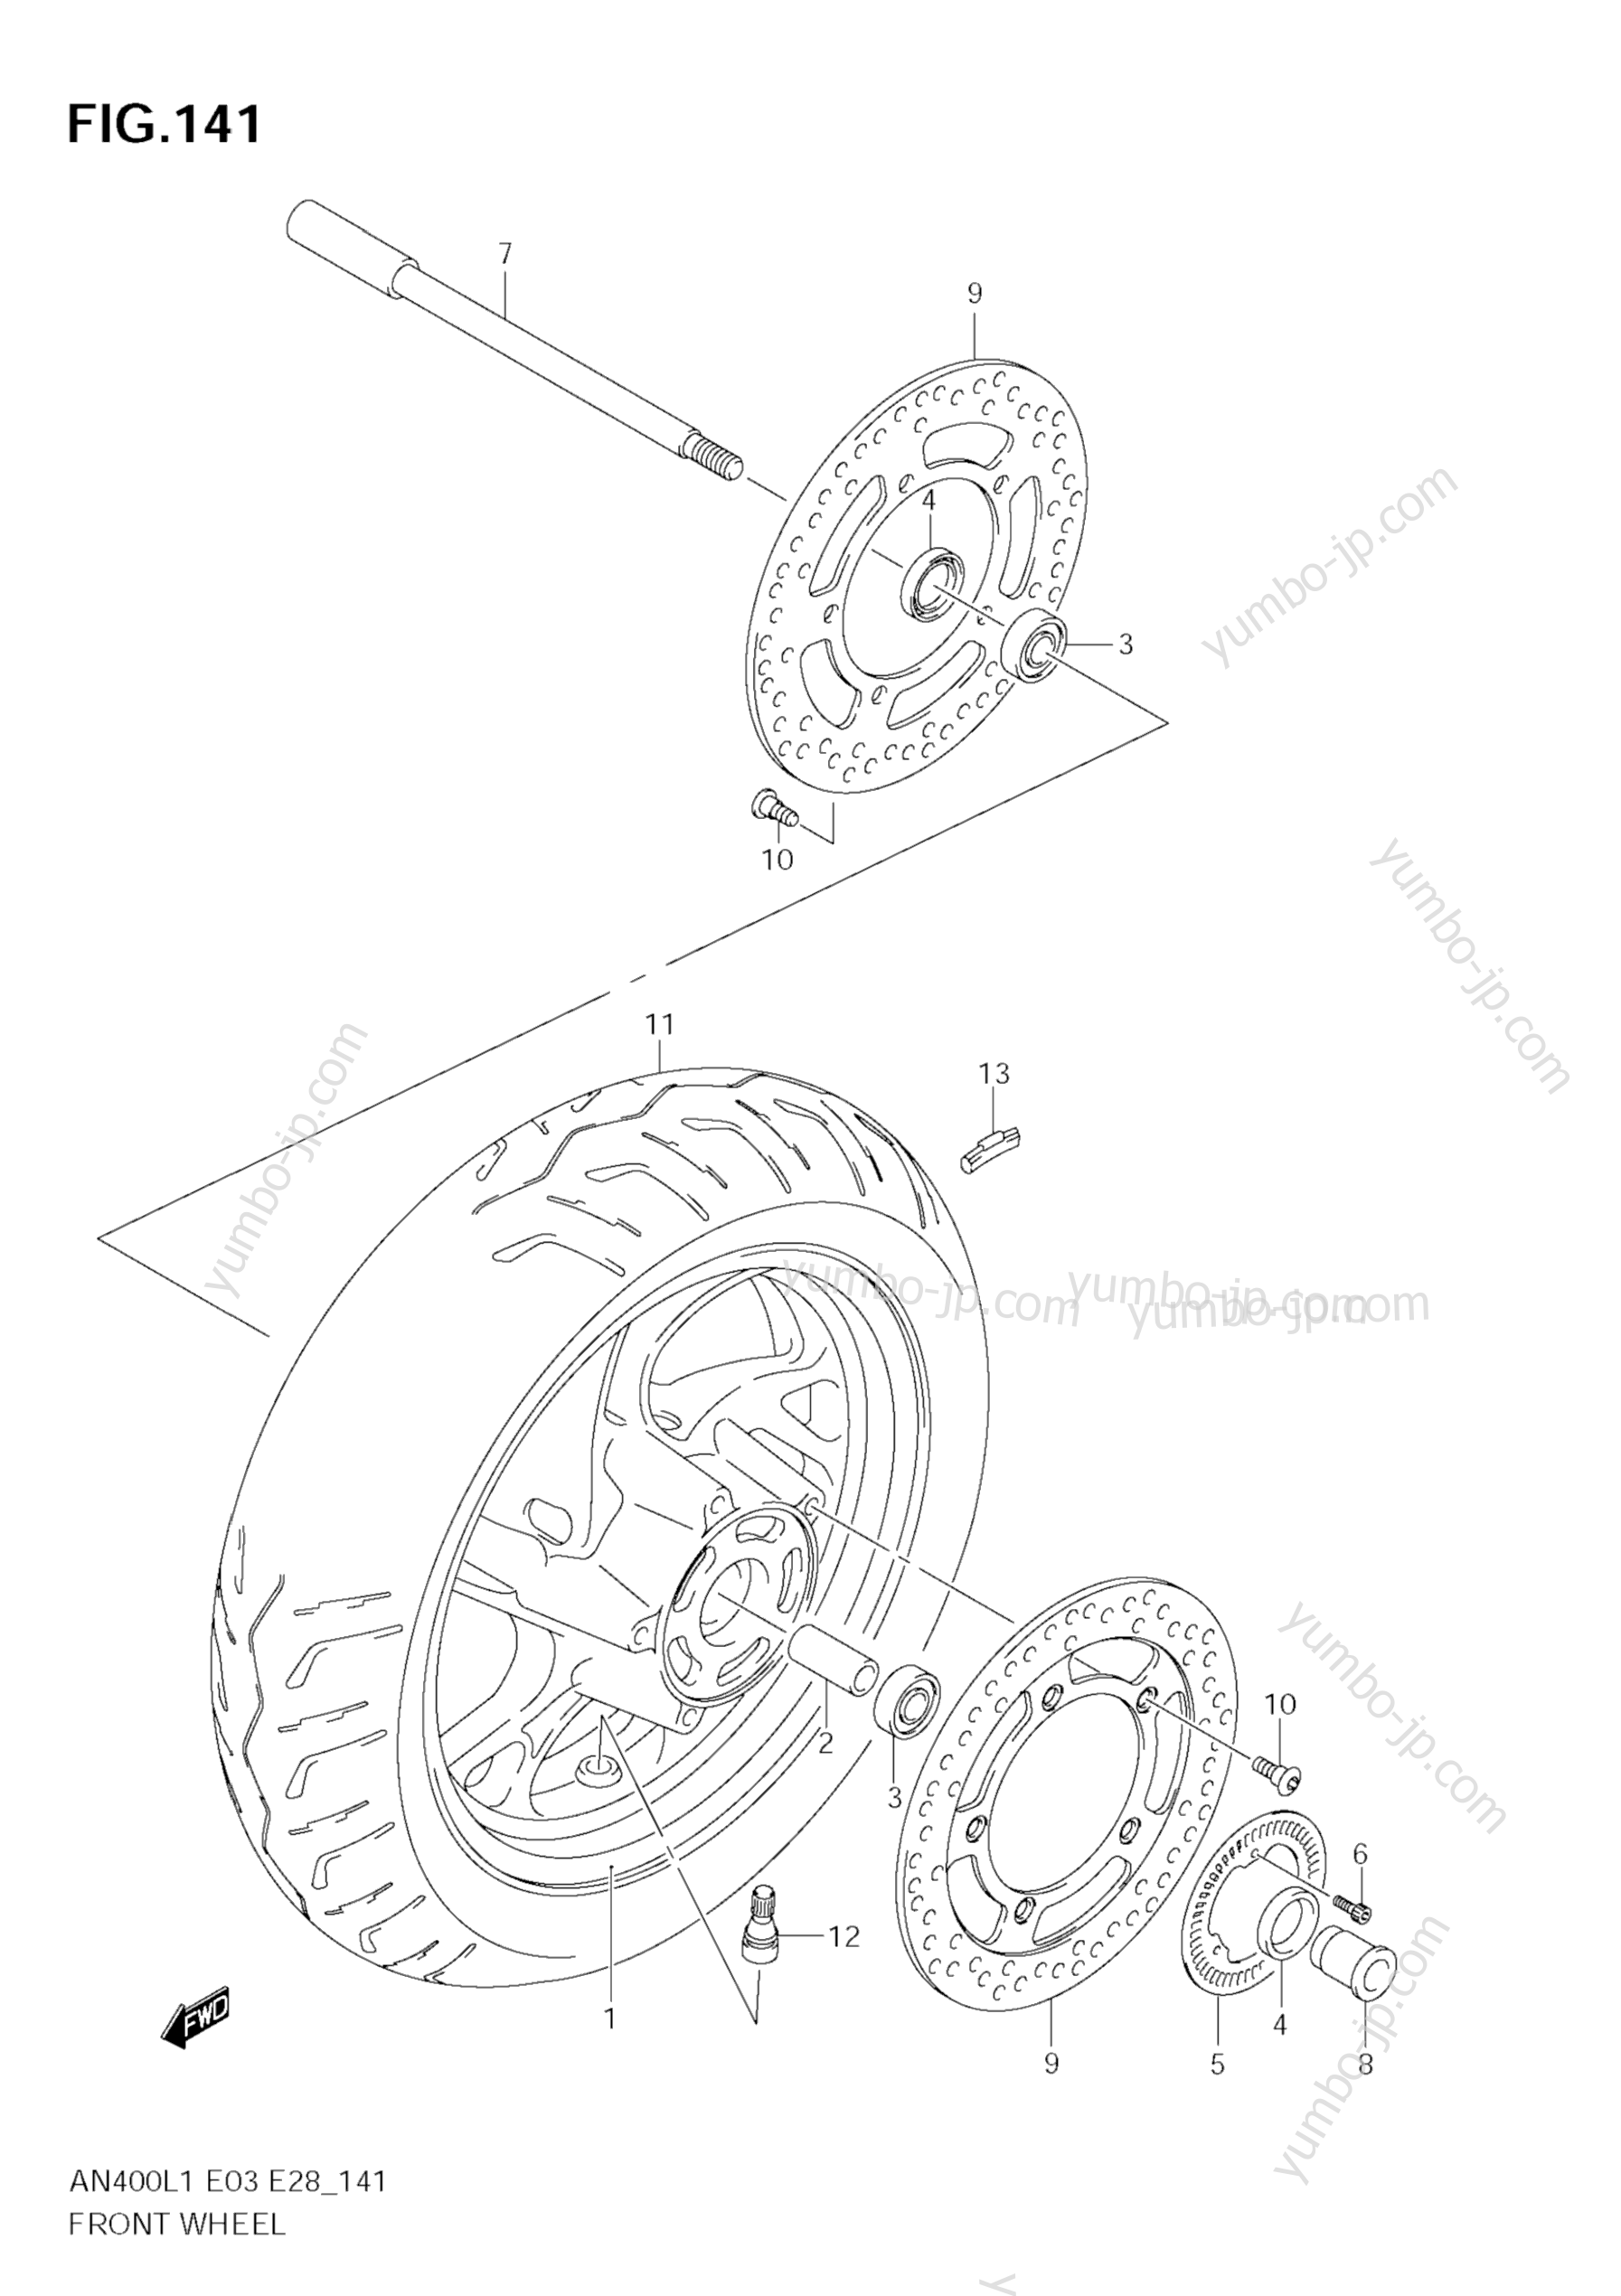 FRONT WHEEL (AN400A L1 E33) for scooters SUZUKI Burgman (AN400A) 2011 year